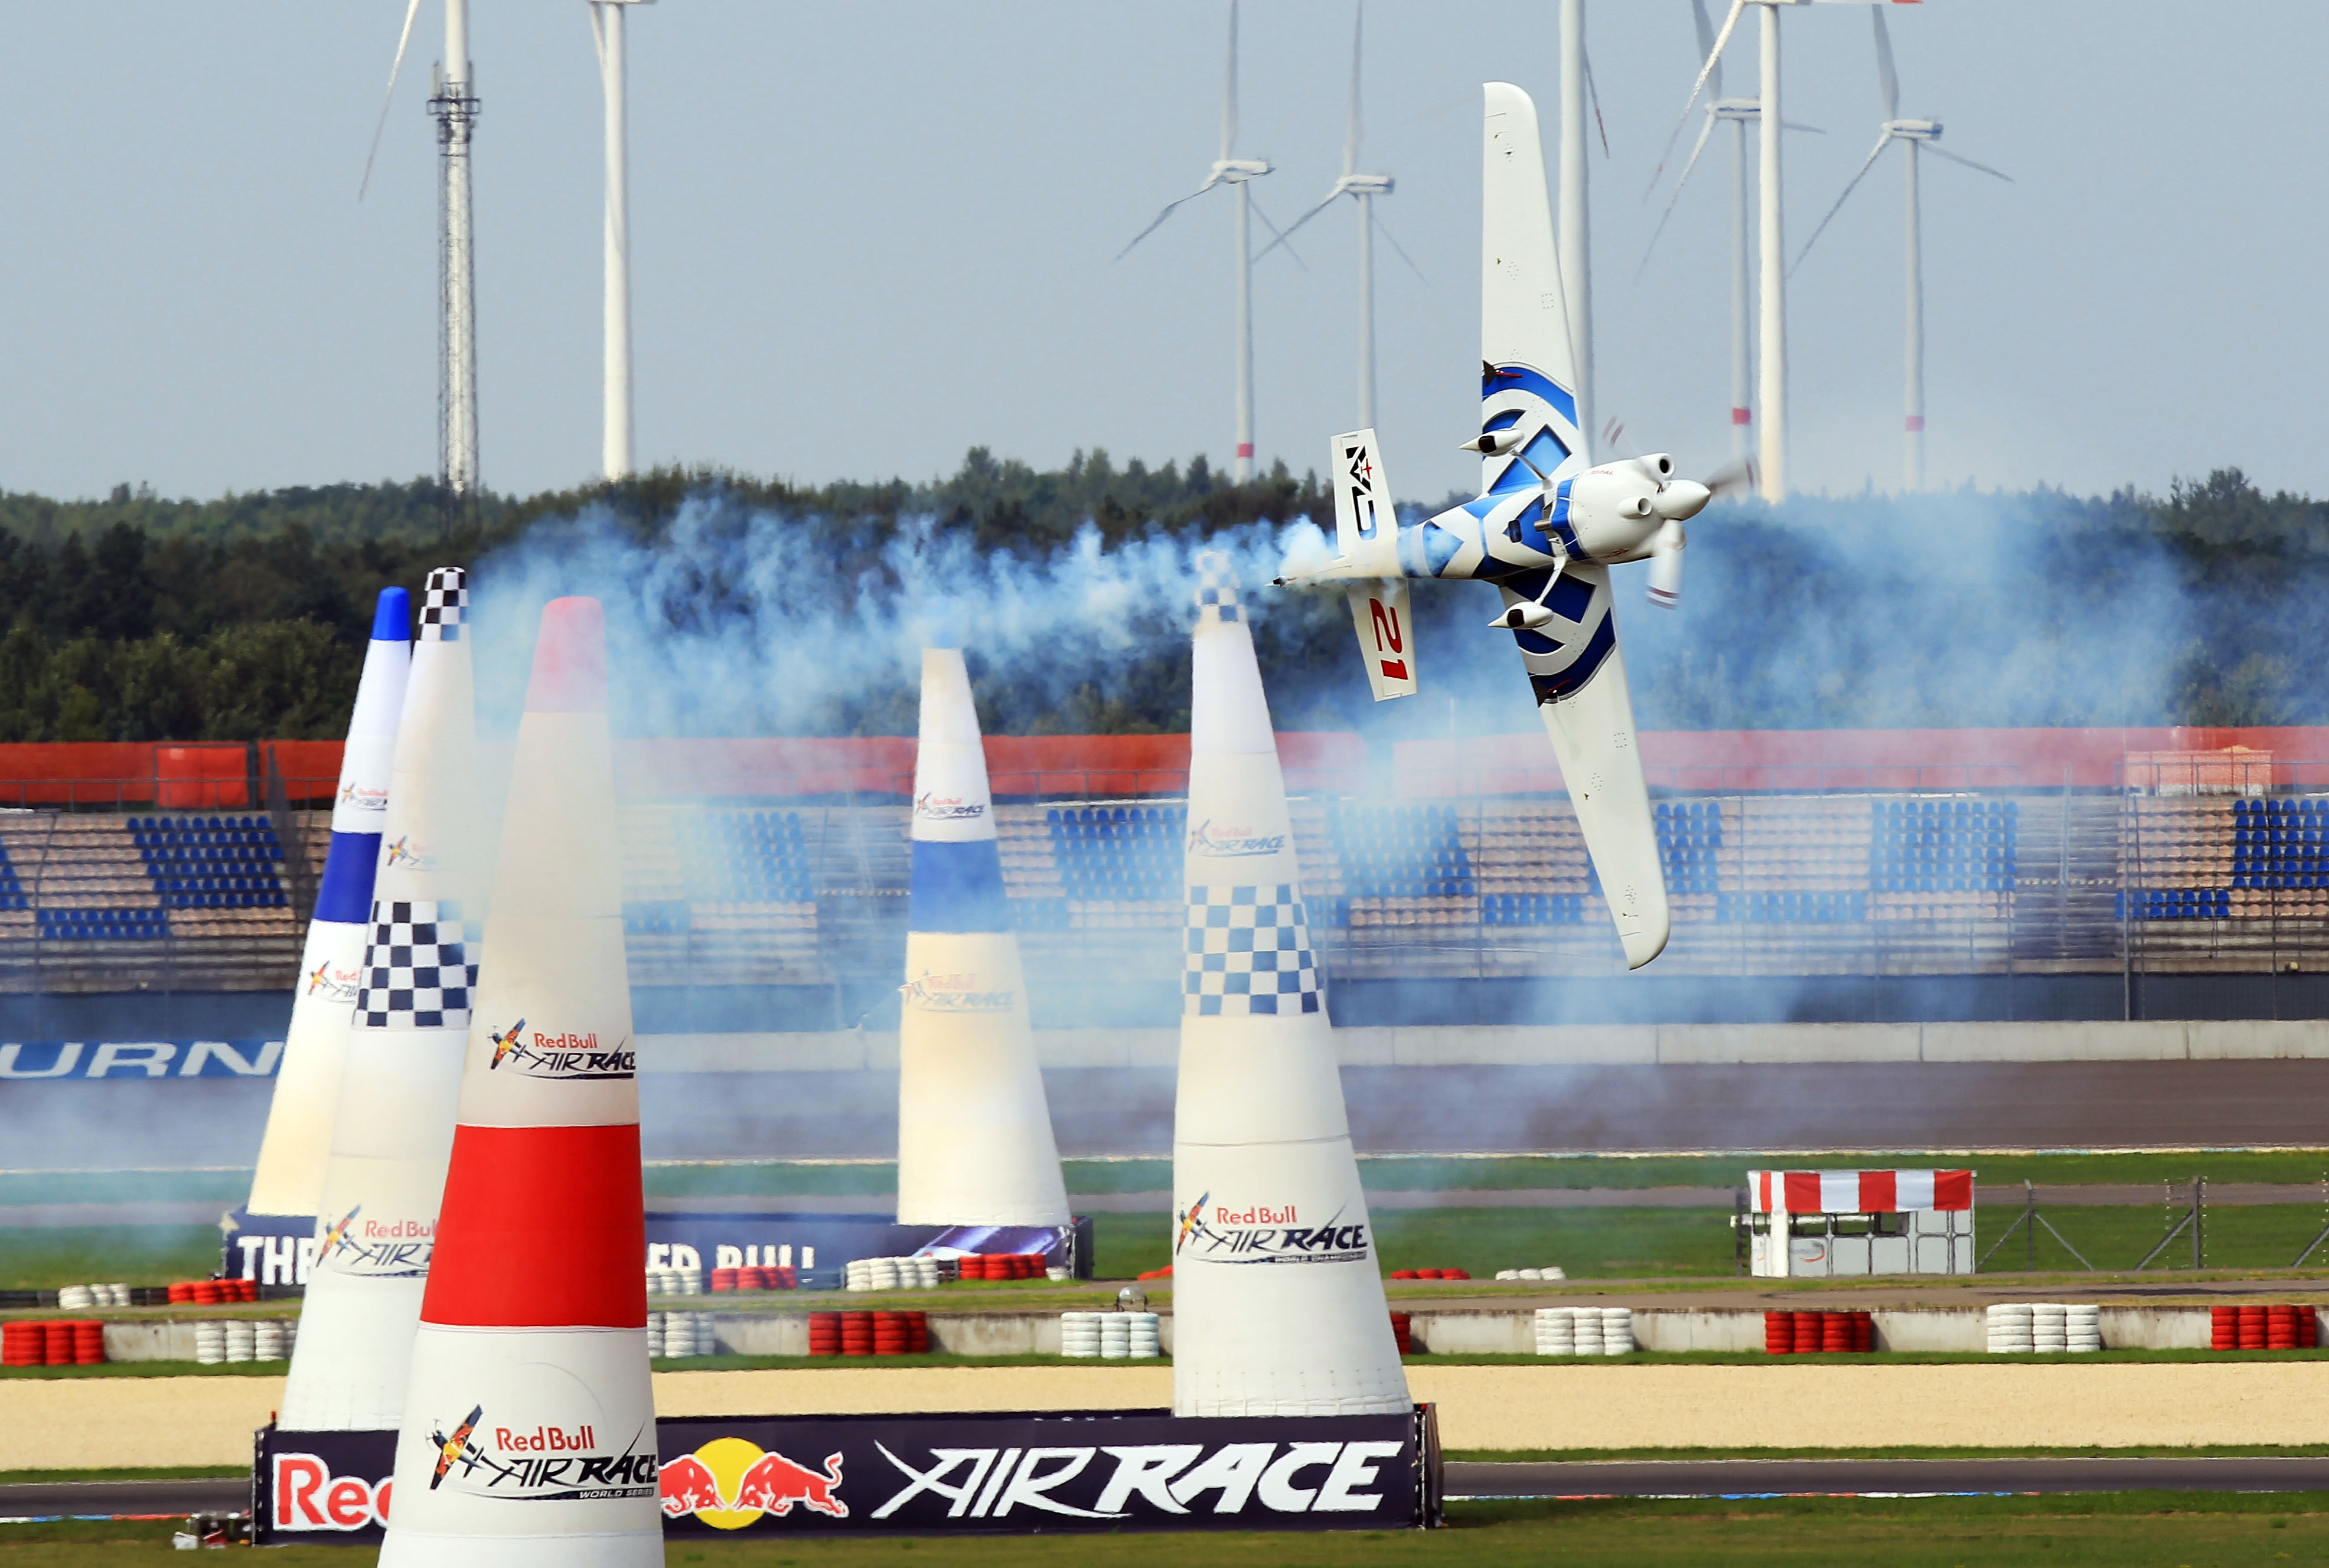 red bull air race, Airplane, Plane, Race, Racing, Red, Bull, Aircraft, Ud Wallpaper